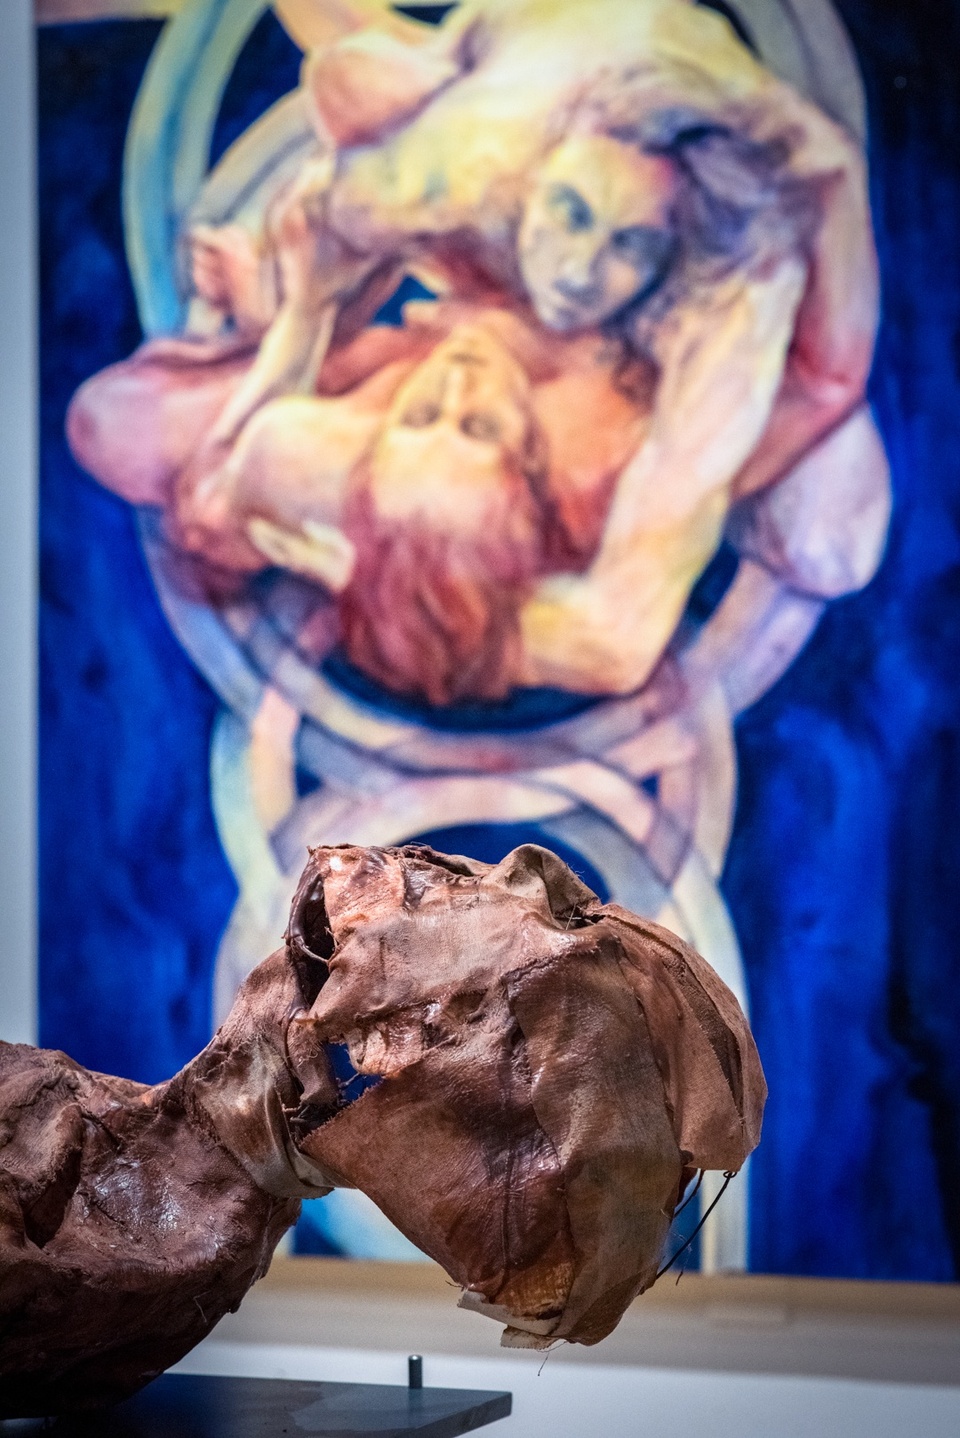 Detail of a bright blue and pinkish painting of two bodies entwined. In front of the painting is a close-up of a leathery-looking mummy head.